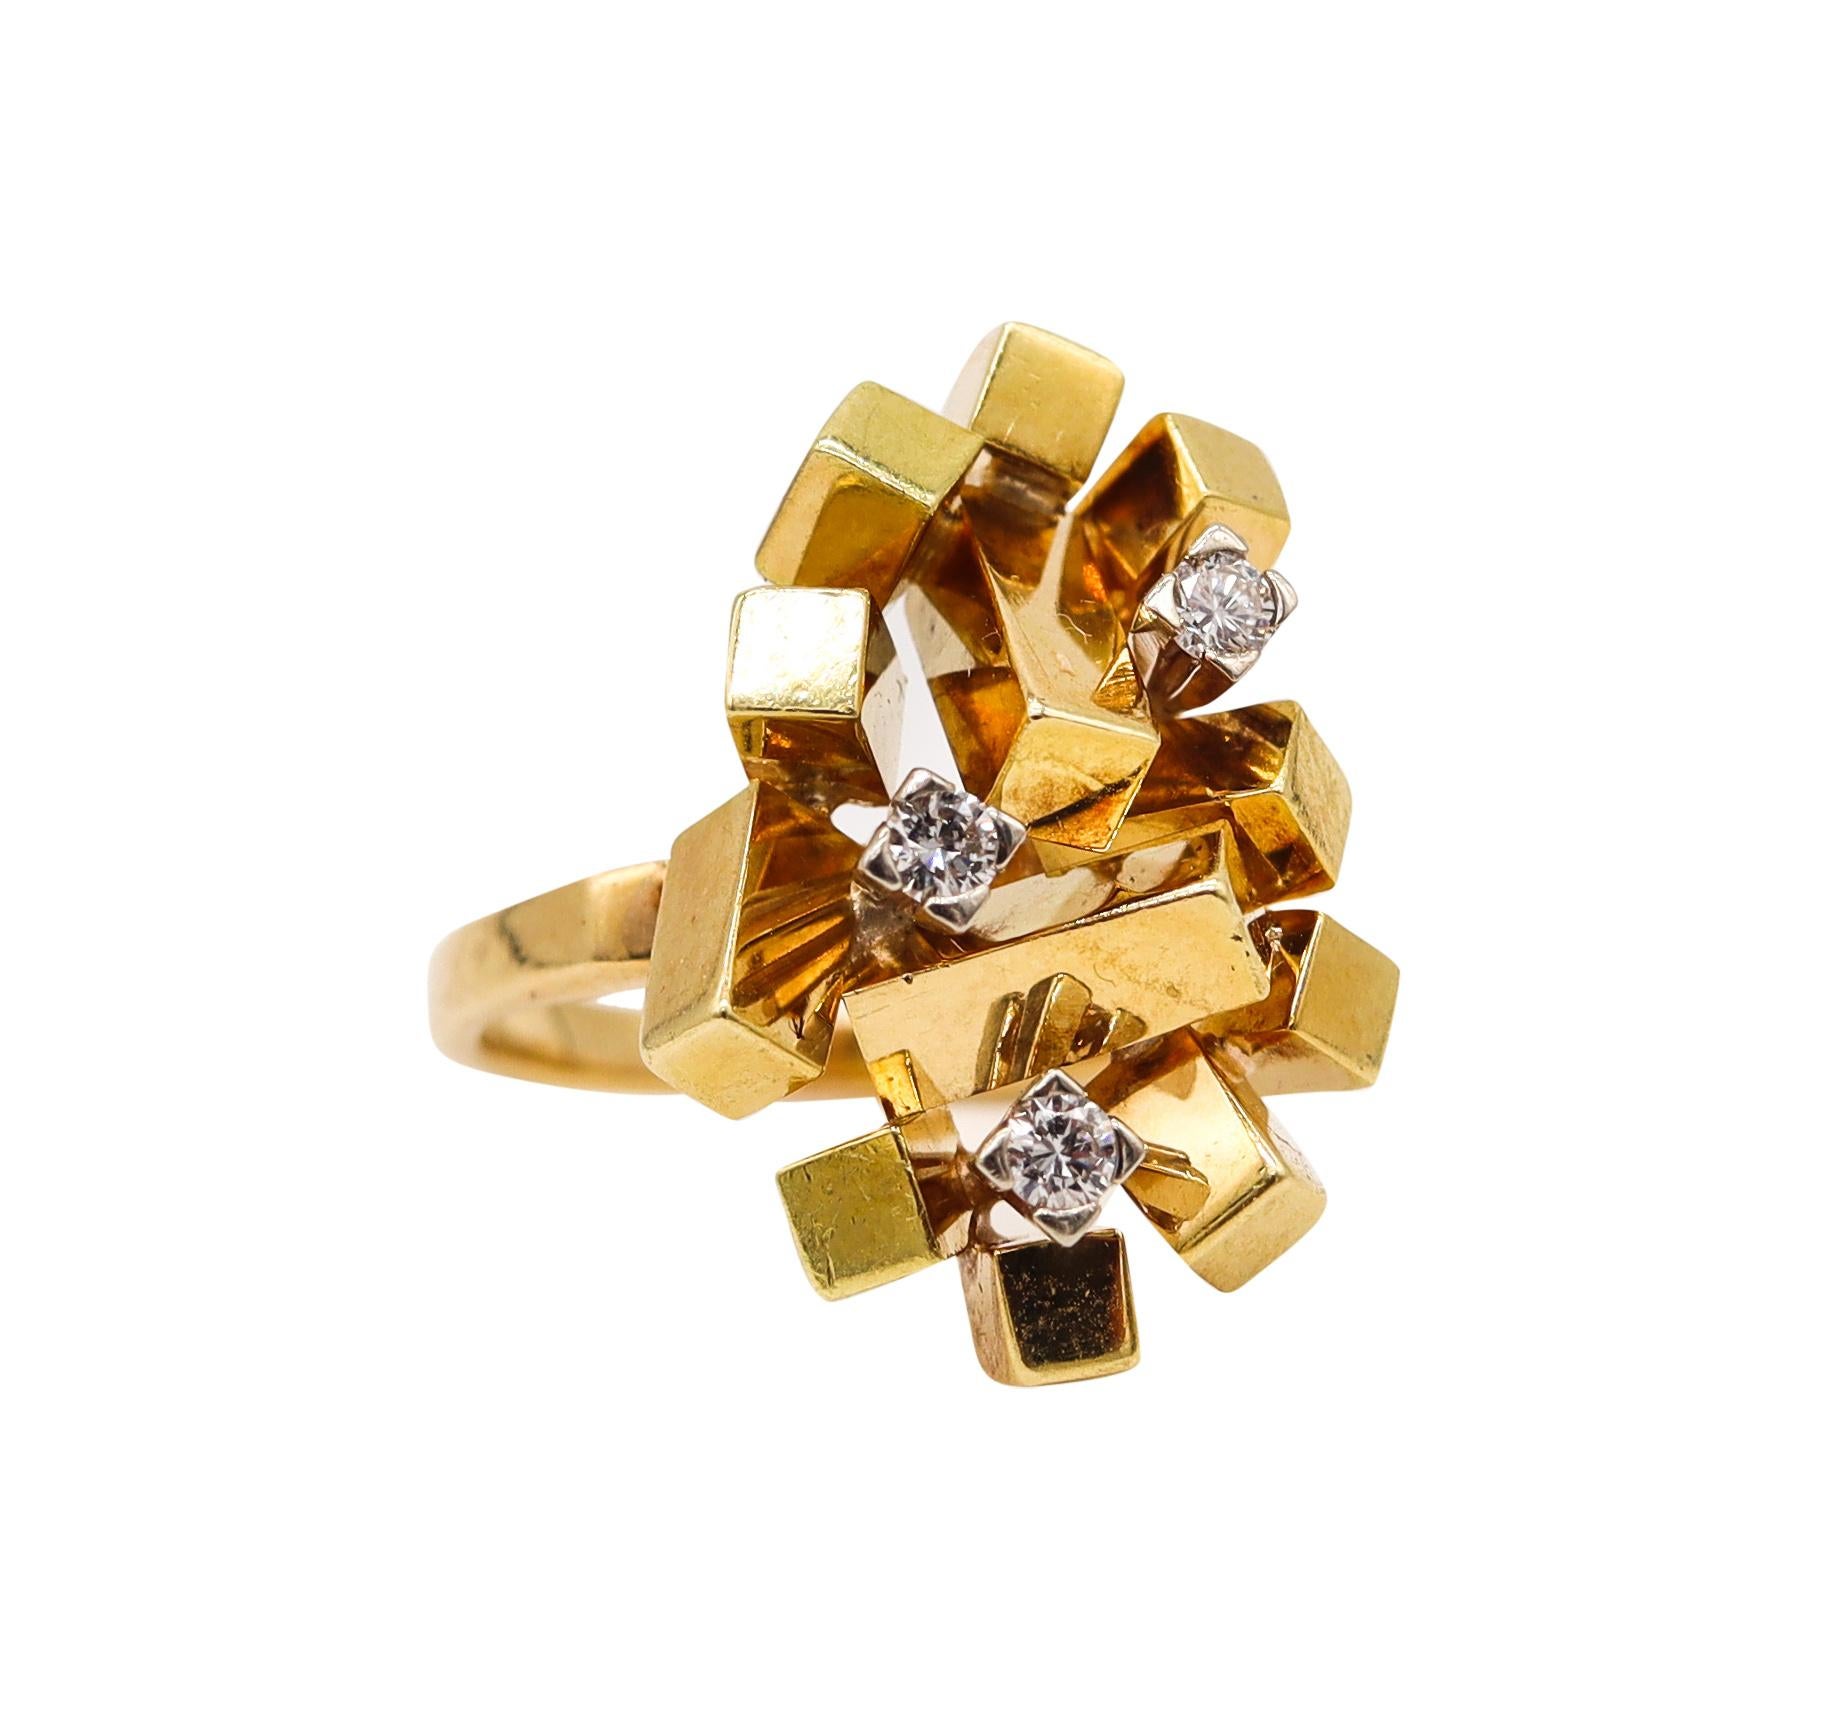 Alfred Karram 1970 Brutalist Geometric Cubic Ring in 18 Kt Gold with Diamonds 2